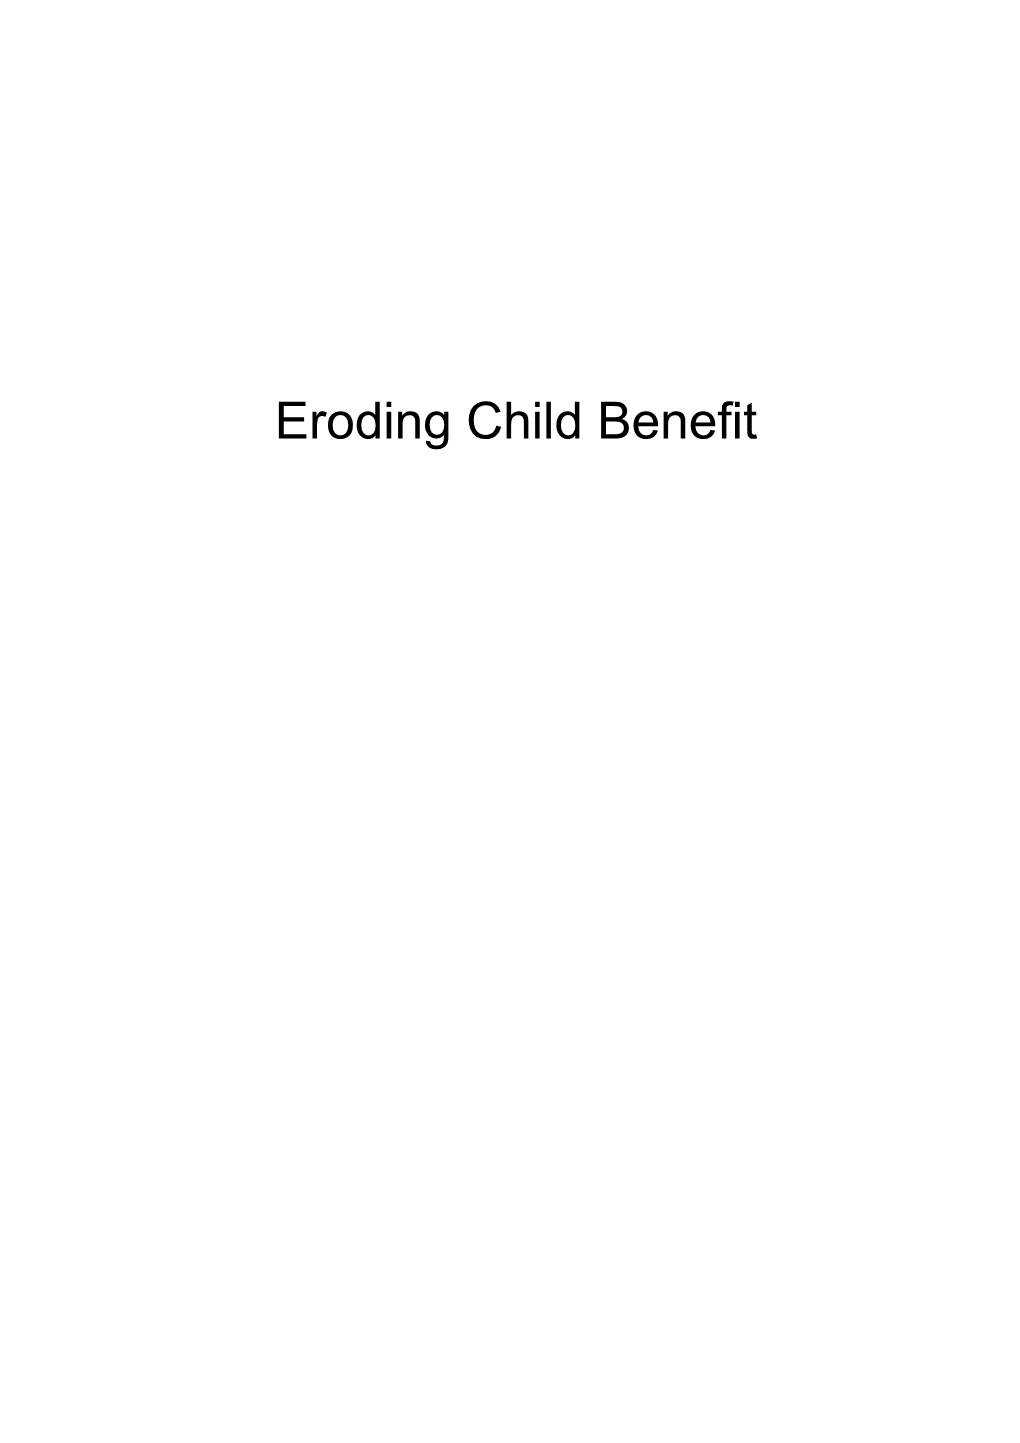 Changes Made by the 2010 15 Government Eroded the Value of Child Benefit and Changes Already